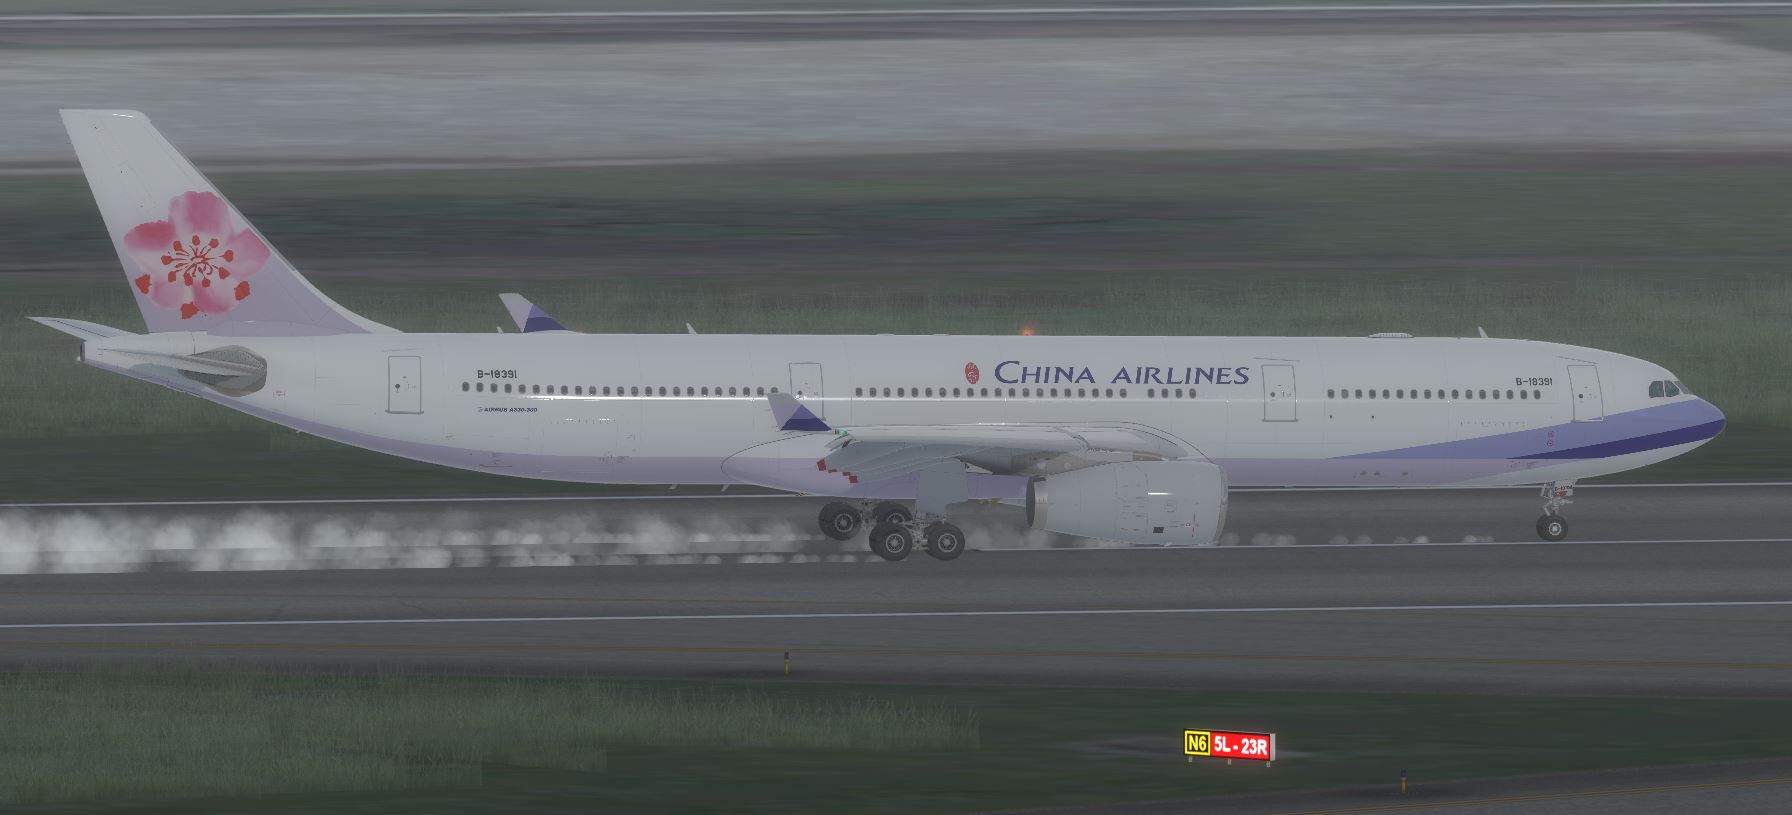 AS A330 ChinaAirline-7329 